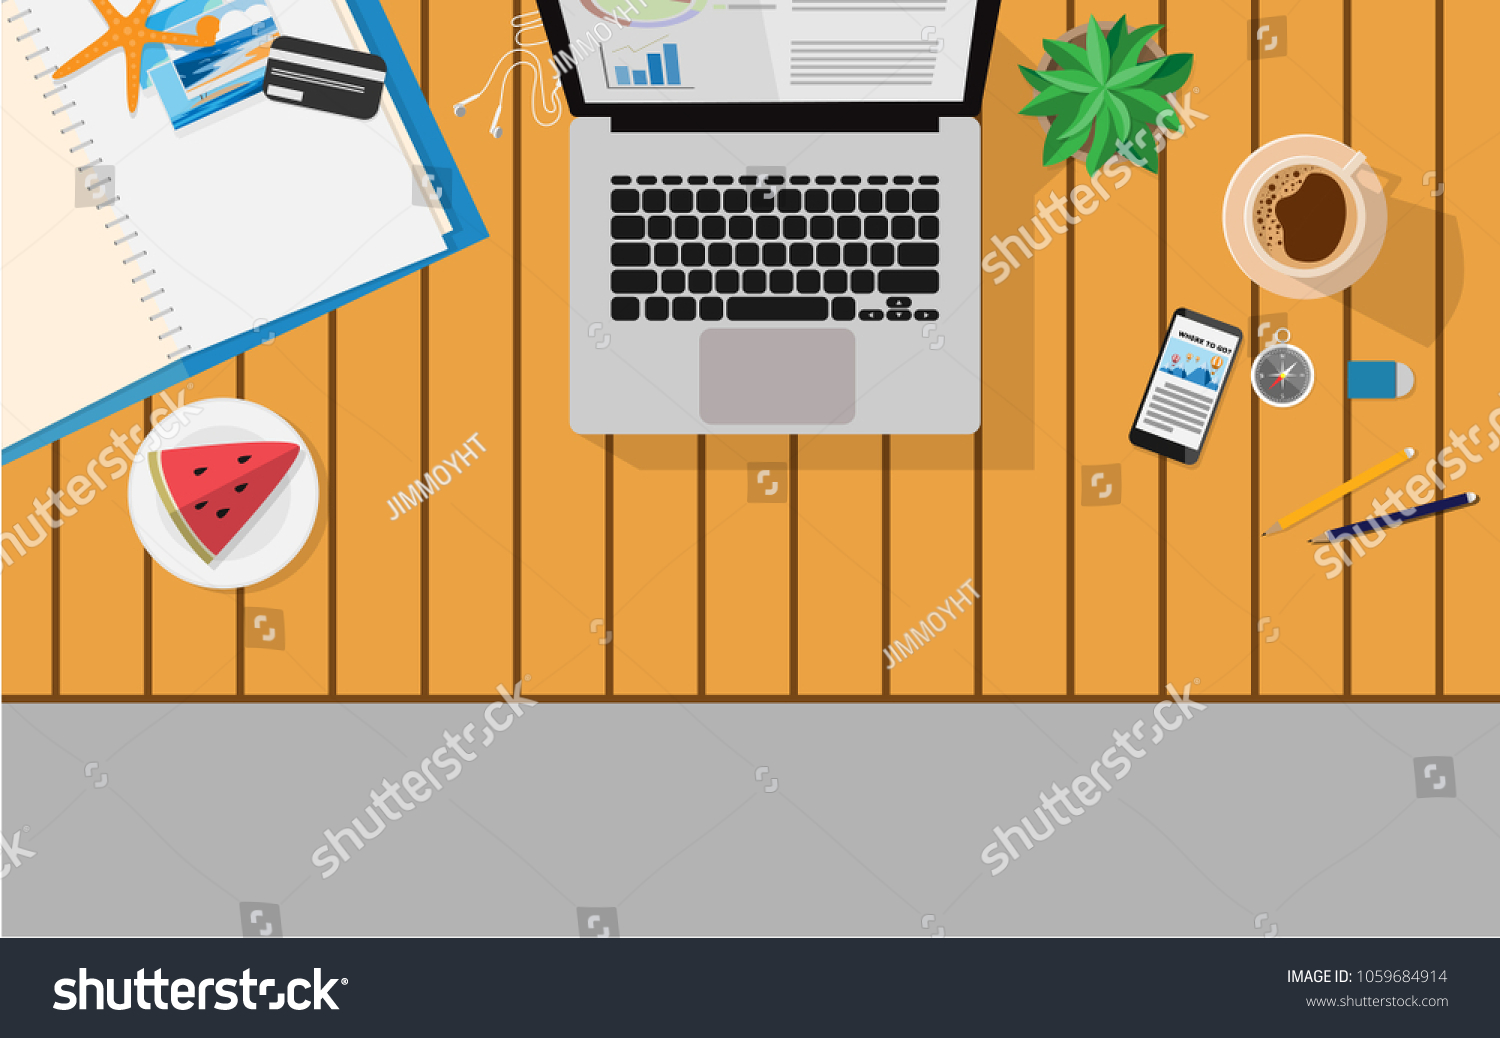 Top Down View Wooden Desk Table Stock Vector Royalty Free 1059684914